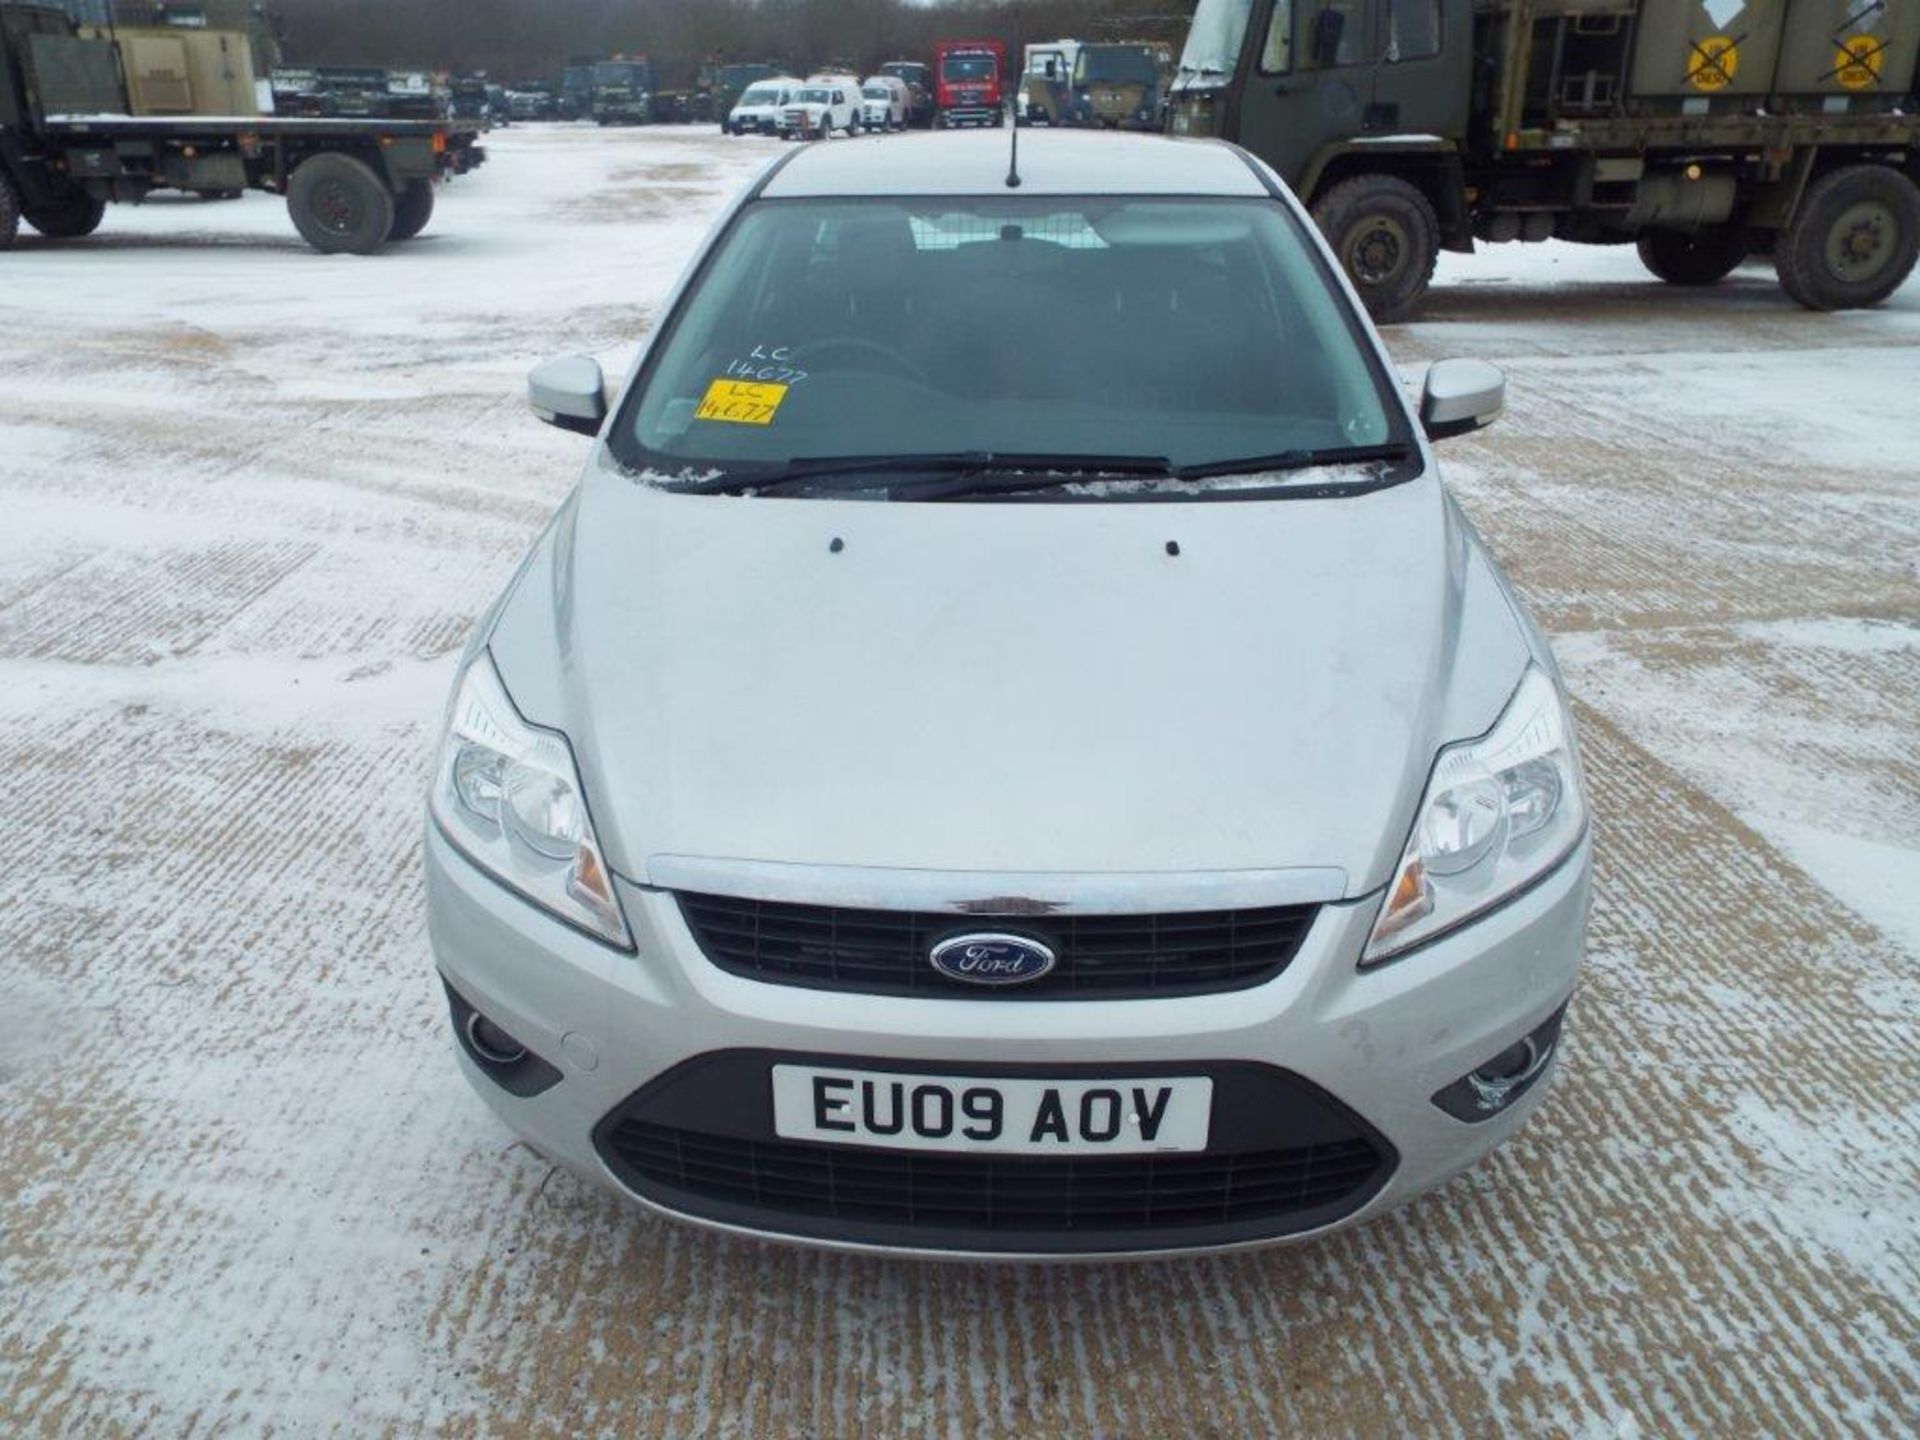 Ford Focus Style 1.8 TD 115 Estate - Only 25,174 Miles! - Image 2 of 21